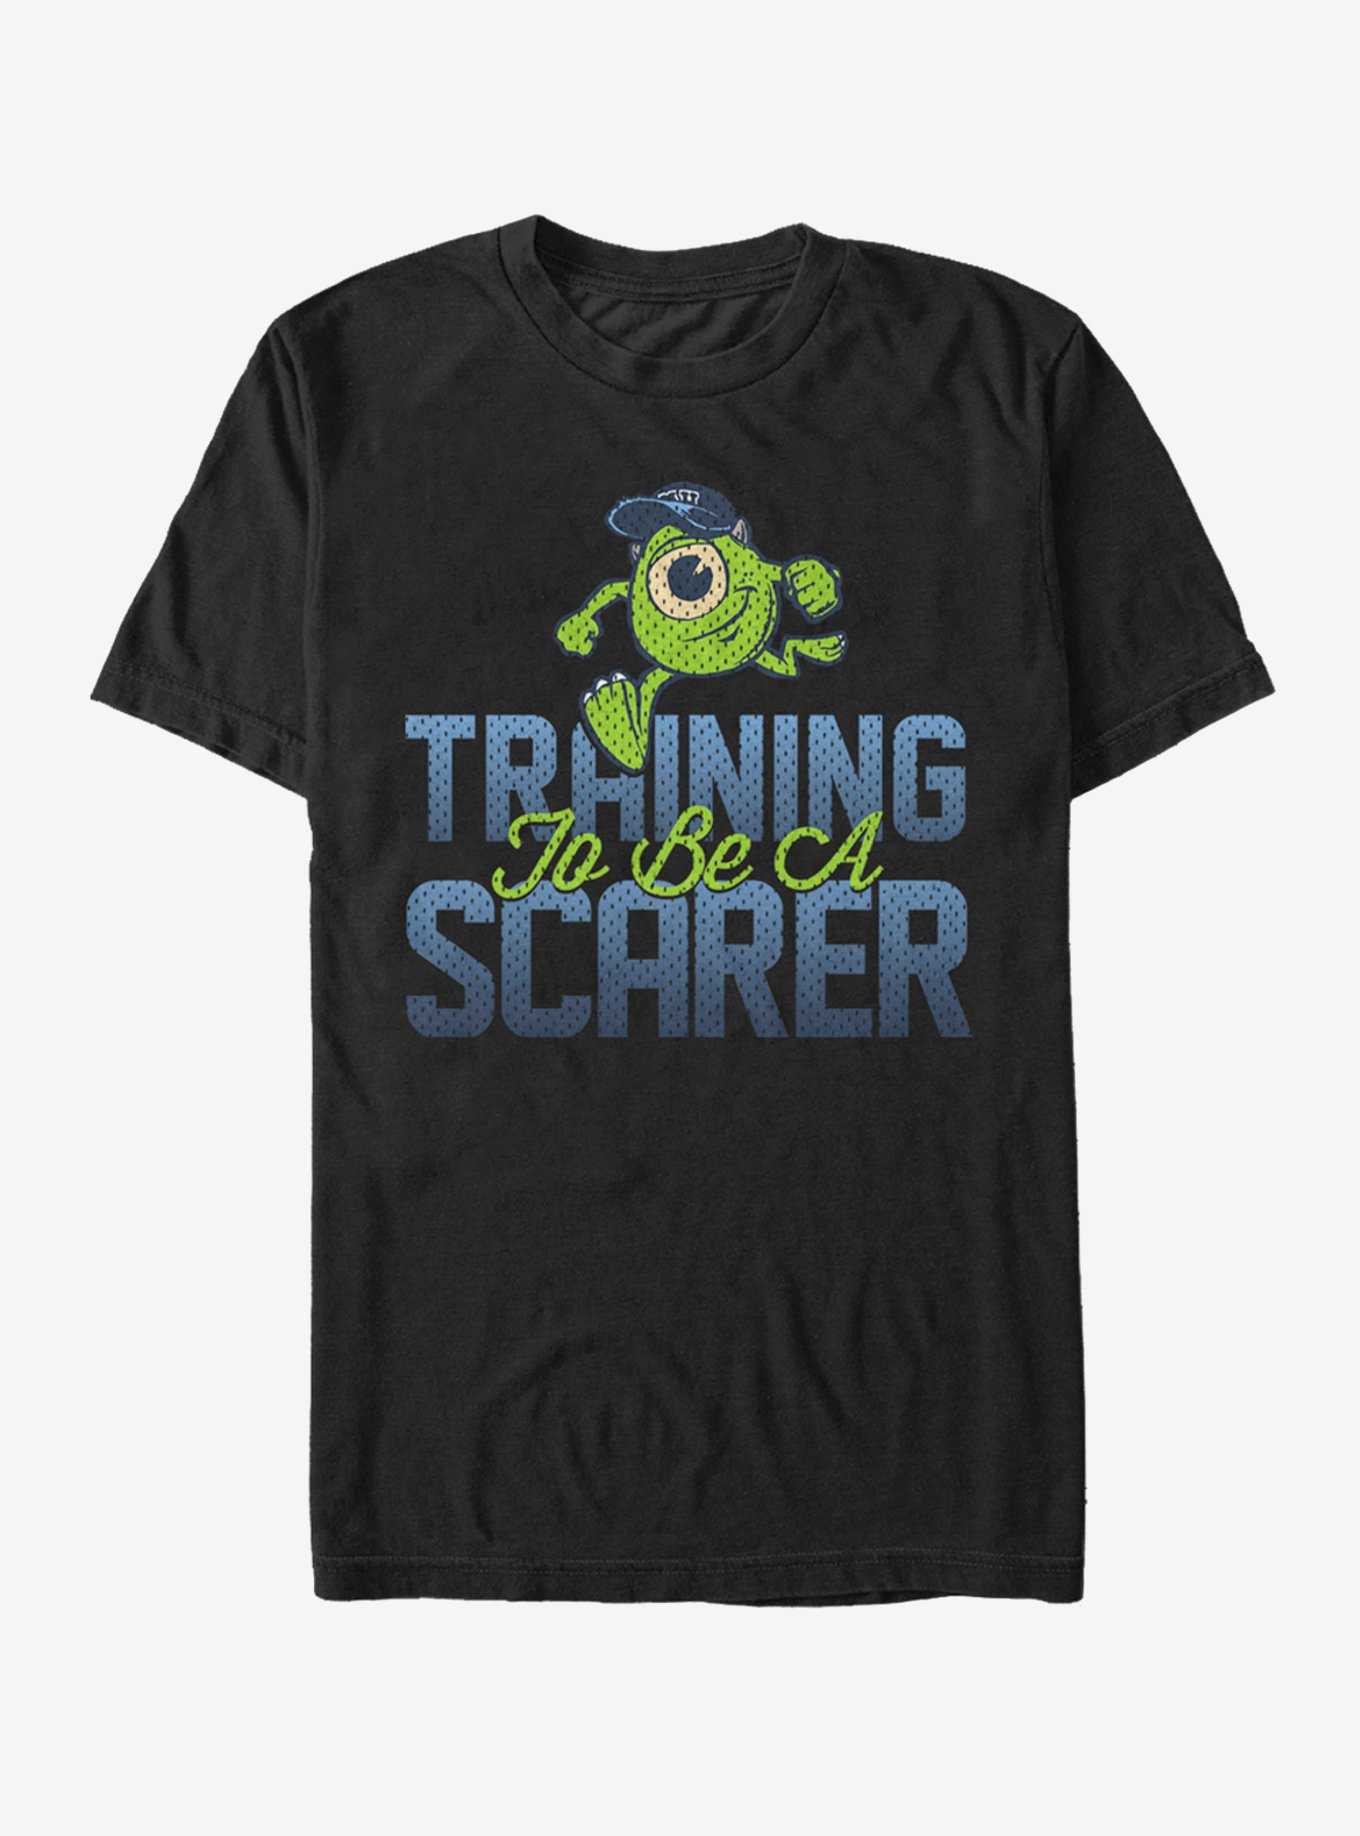 Monsters Inc. Training to be a Scarer T-Shirt, , hi-res